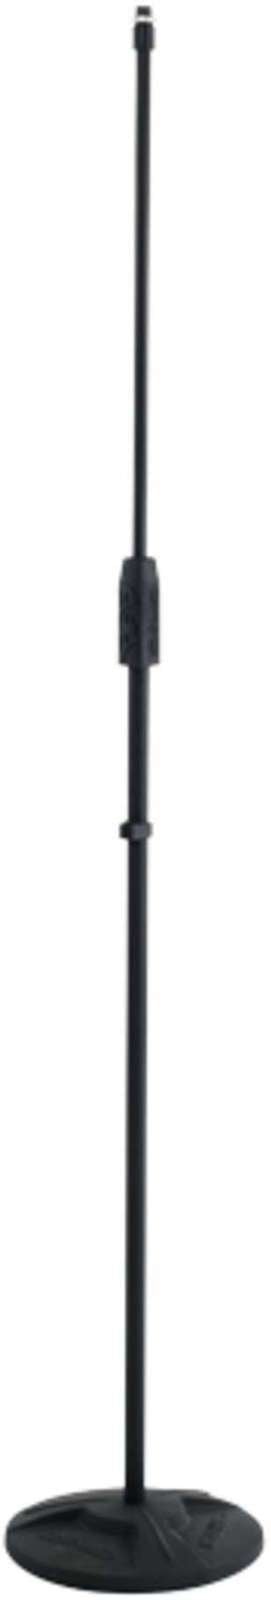 Microphone Stand Bespeco MS2RN Microphone Stand